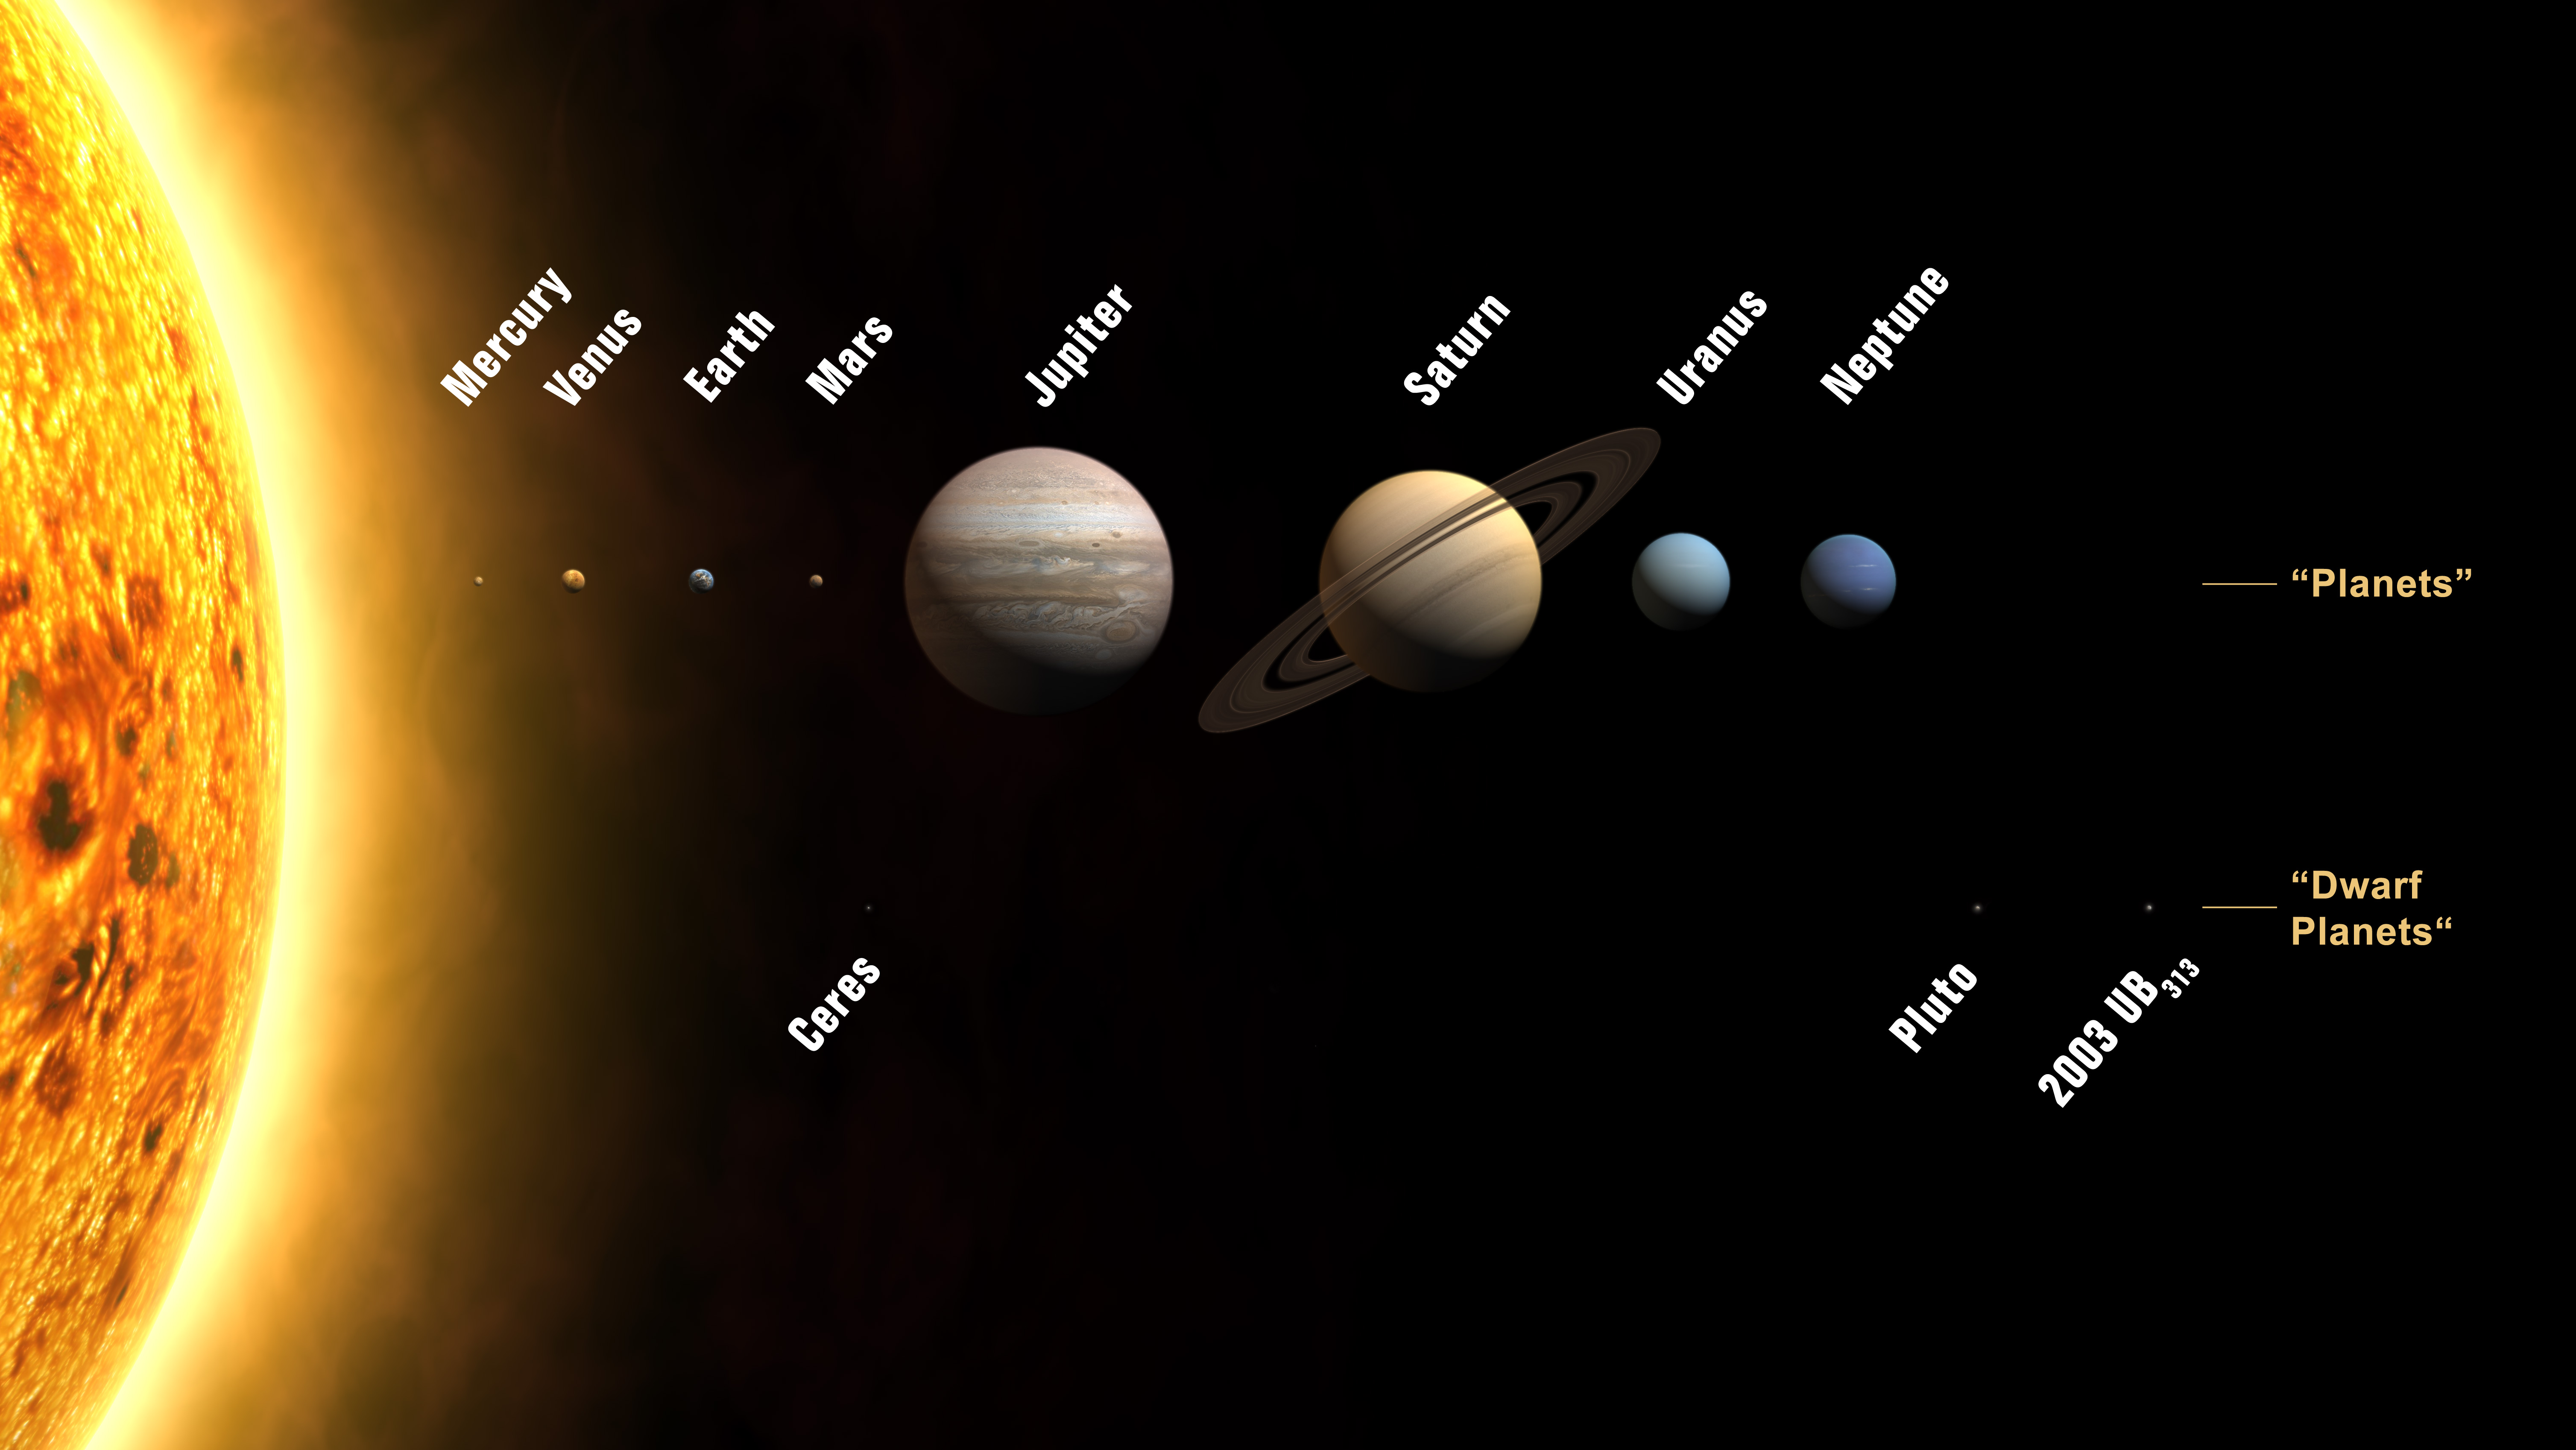 apod-2006-august-28-eight-planets-and-new-solar-system-designations